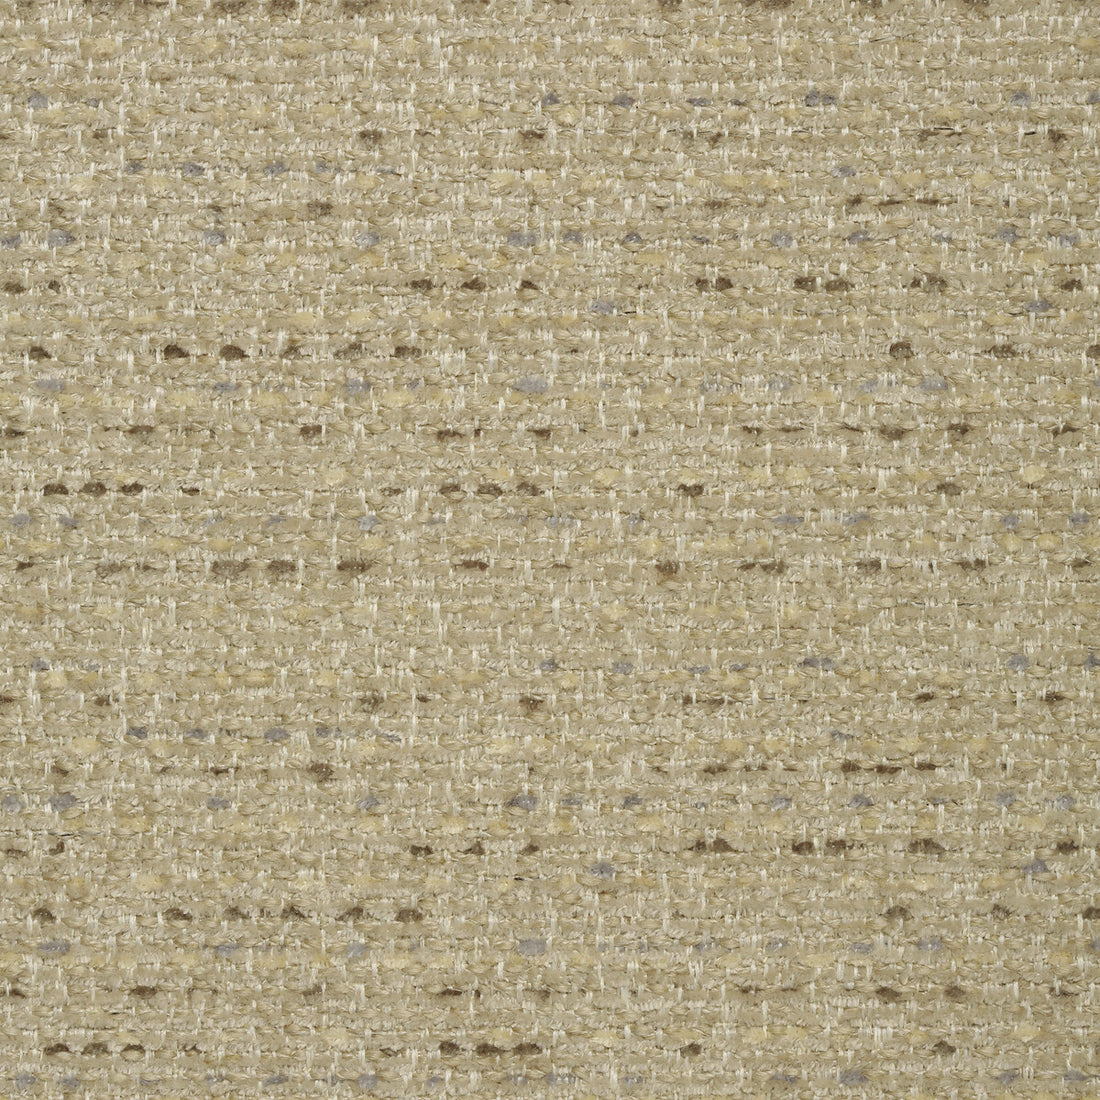 Kravet Contract fabric in 35118-16 color - pattern 35118.16.0 - by Kravet Contract in the Crypton Incase collection